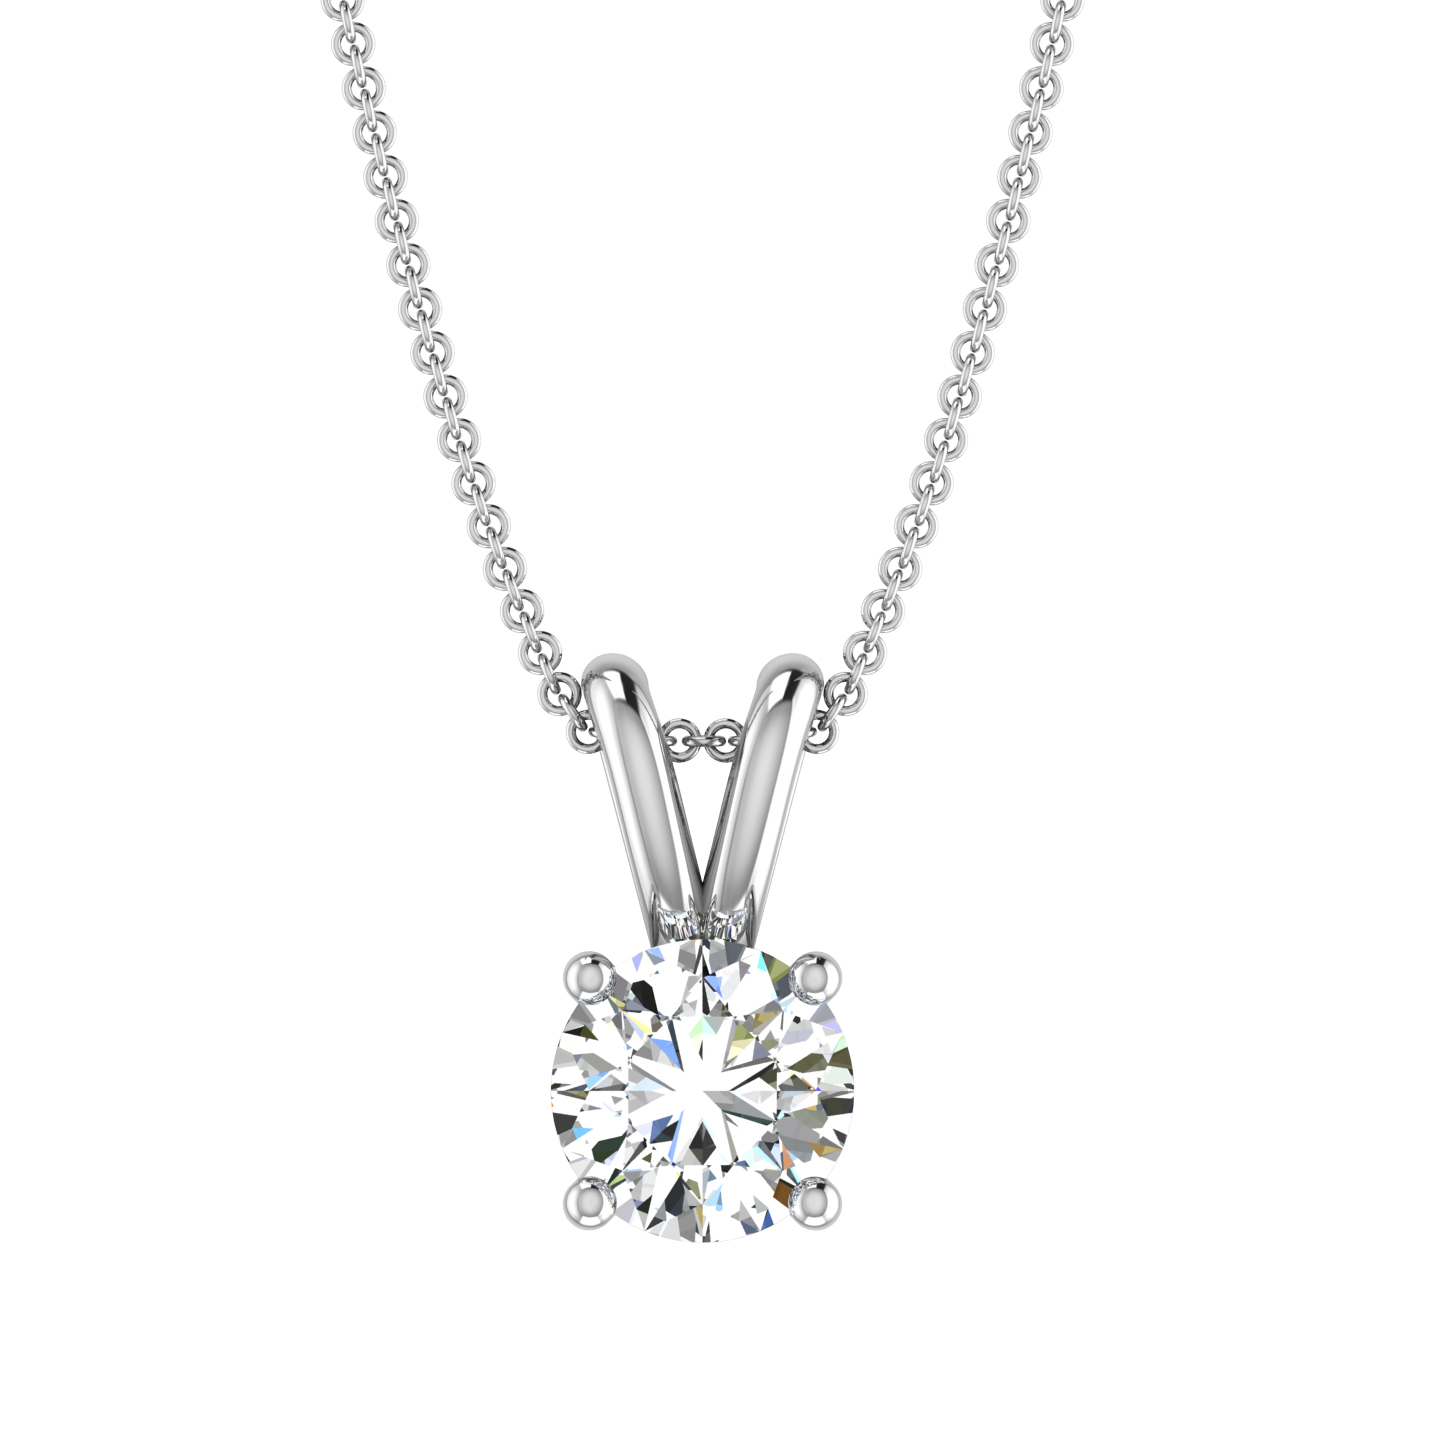 A Buying Guide to Diamond Solitaire Necklaces